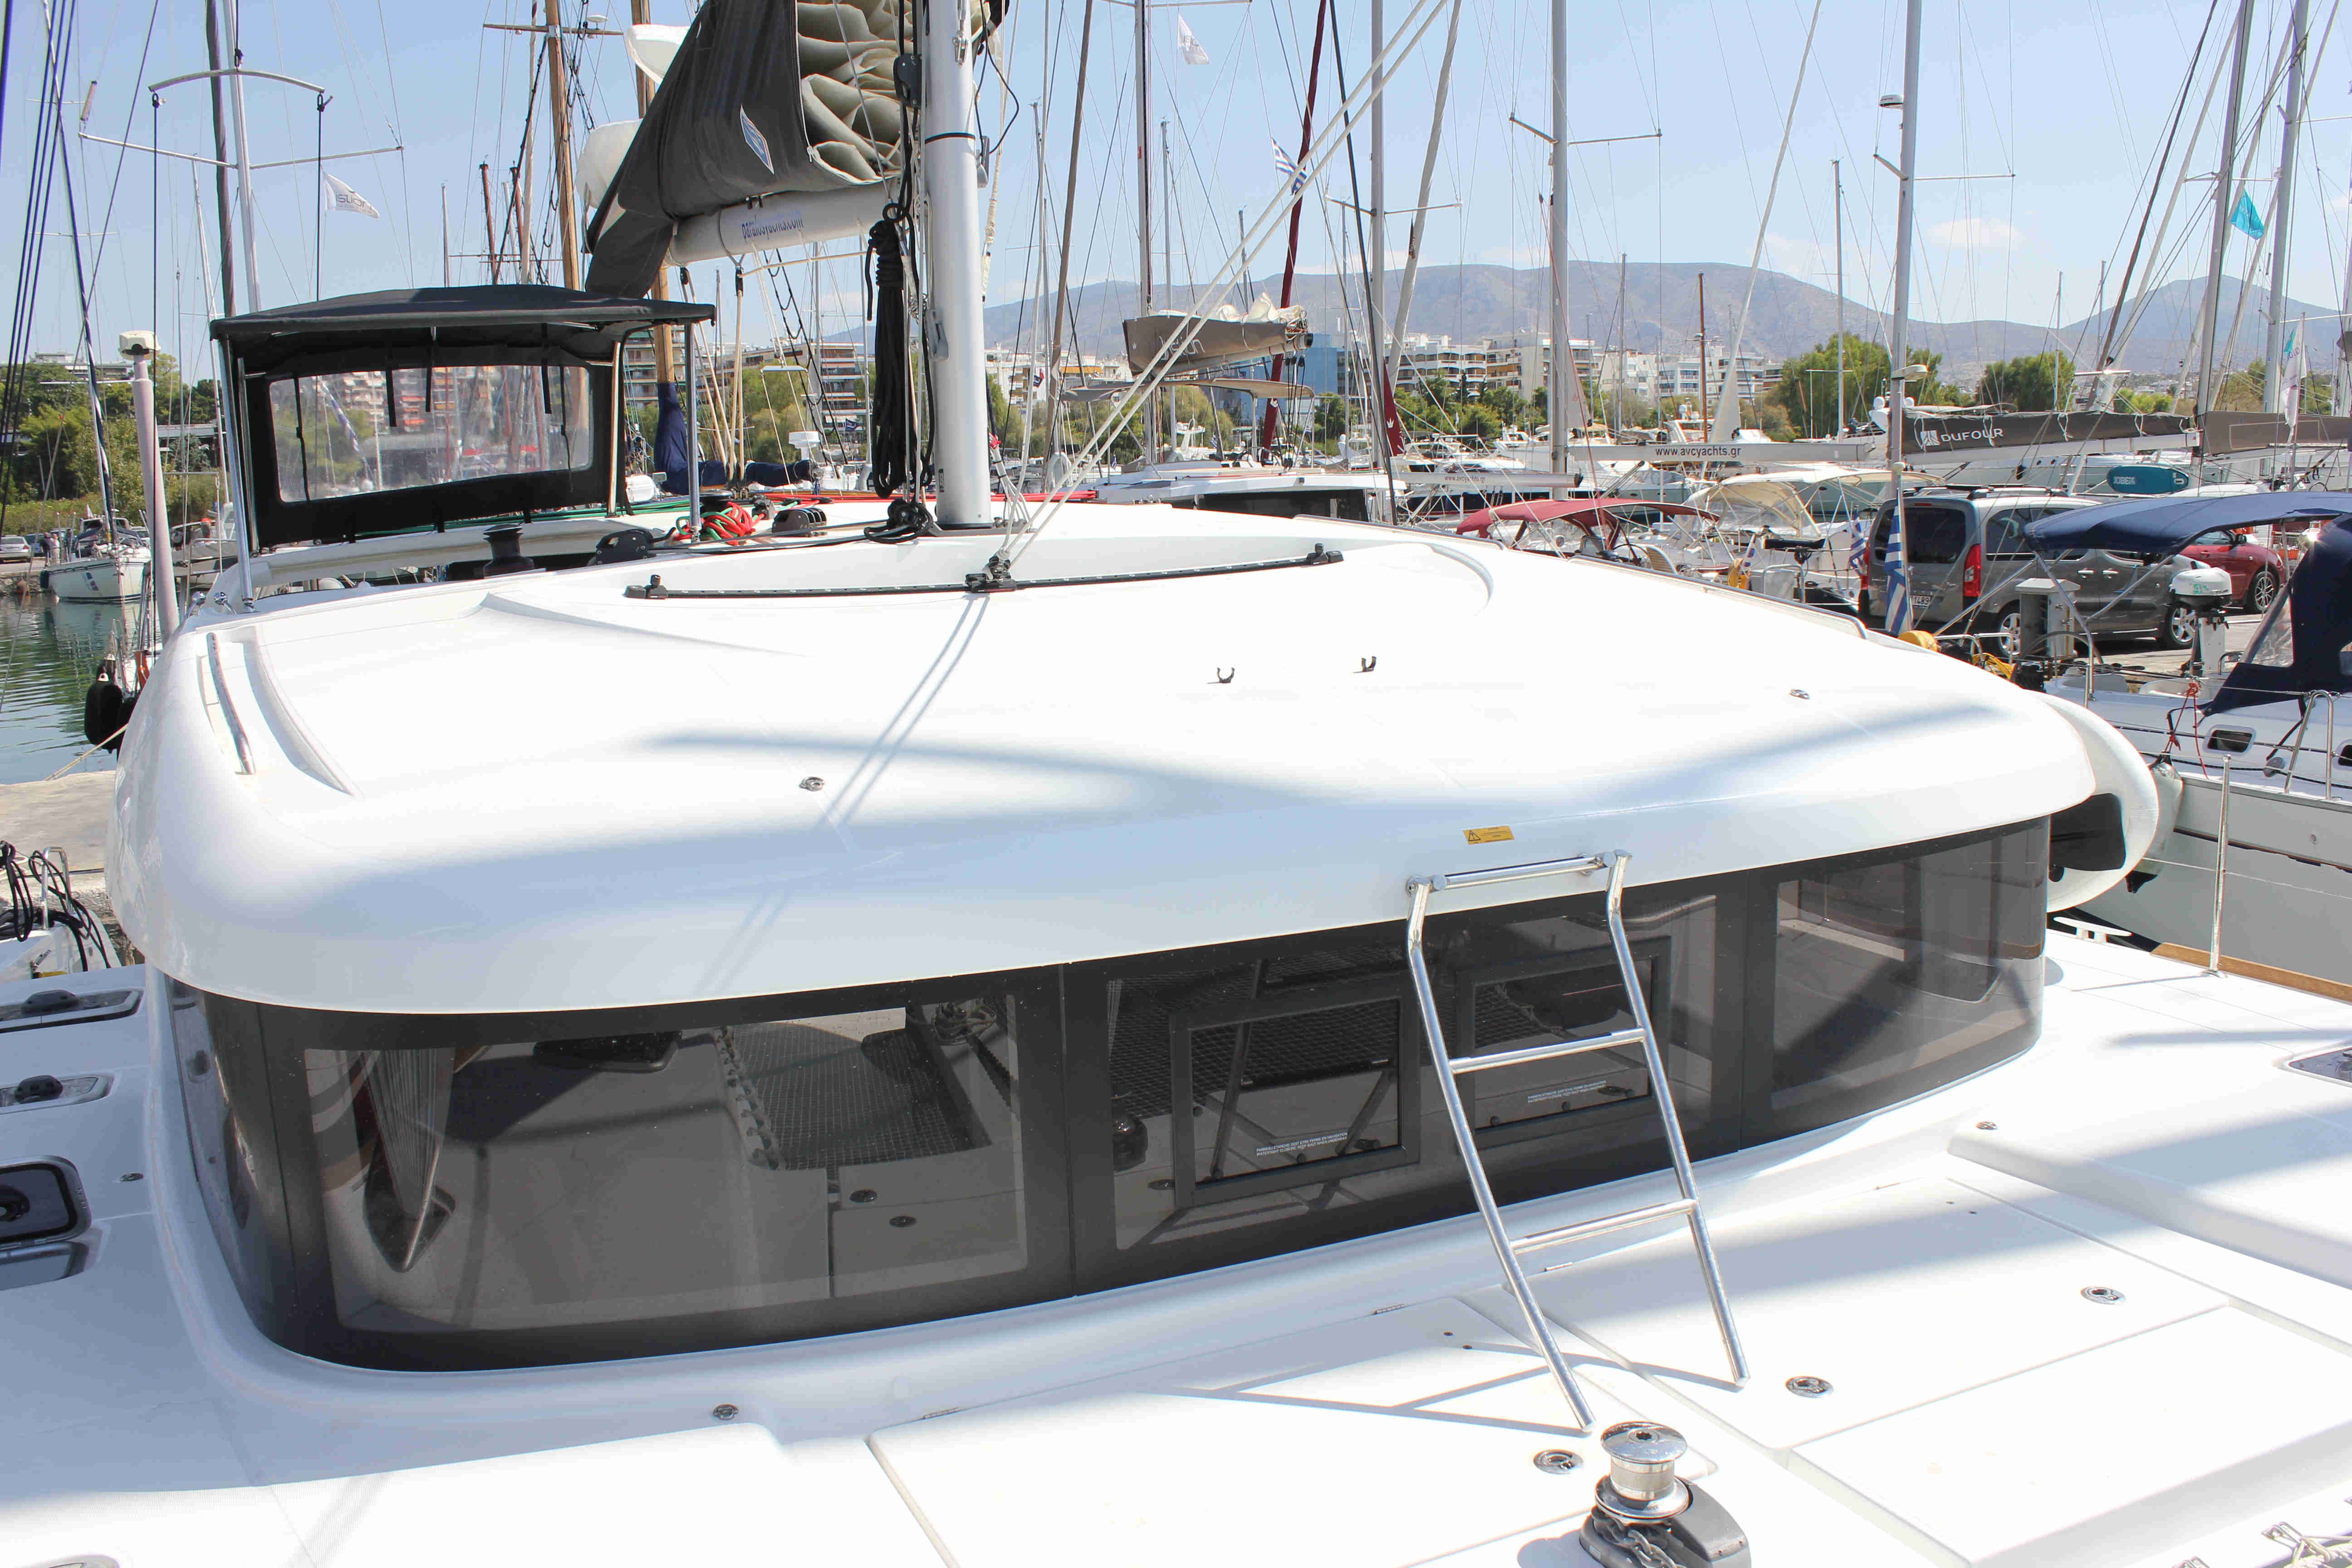 Lagoon 40 - Alimos Yacht Charter & Boat hire in Greece Athens and Saronic Gulf Athens Alimos Alimos Marina 5